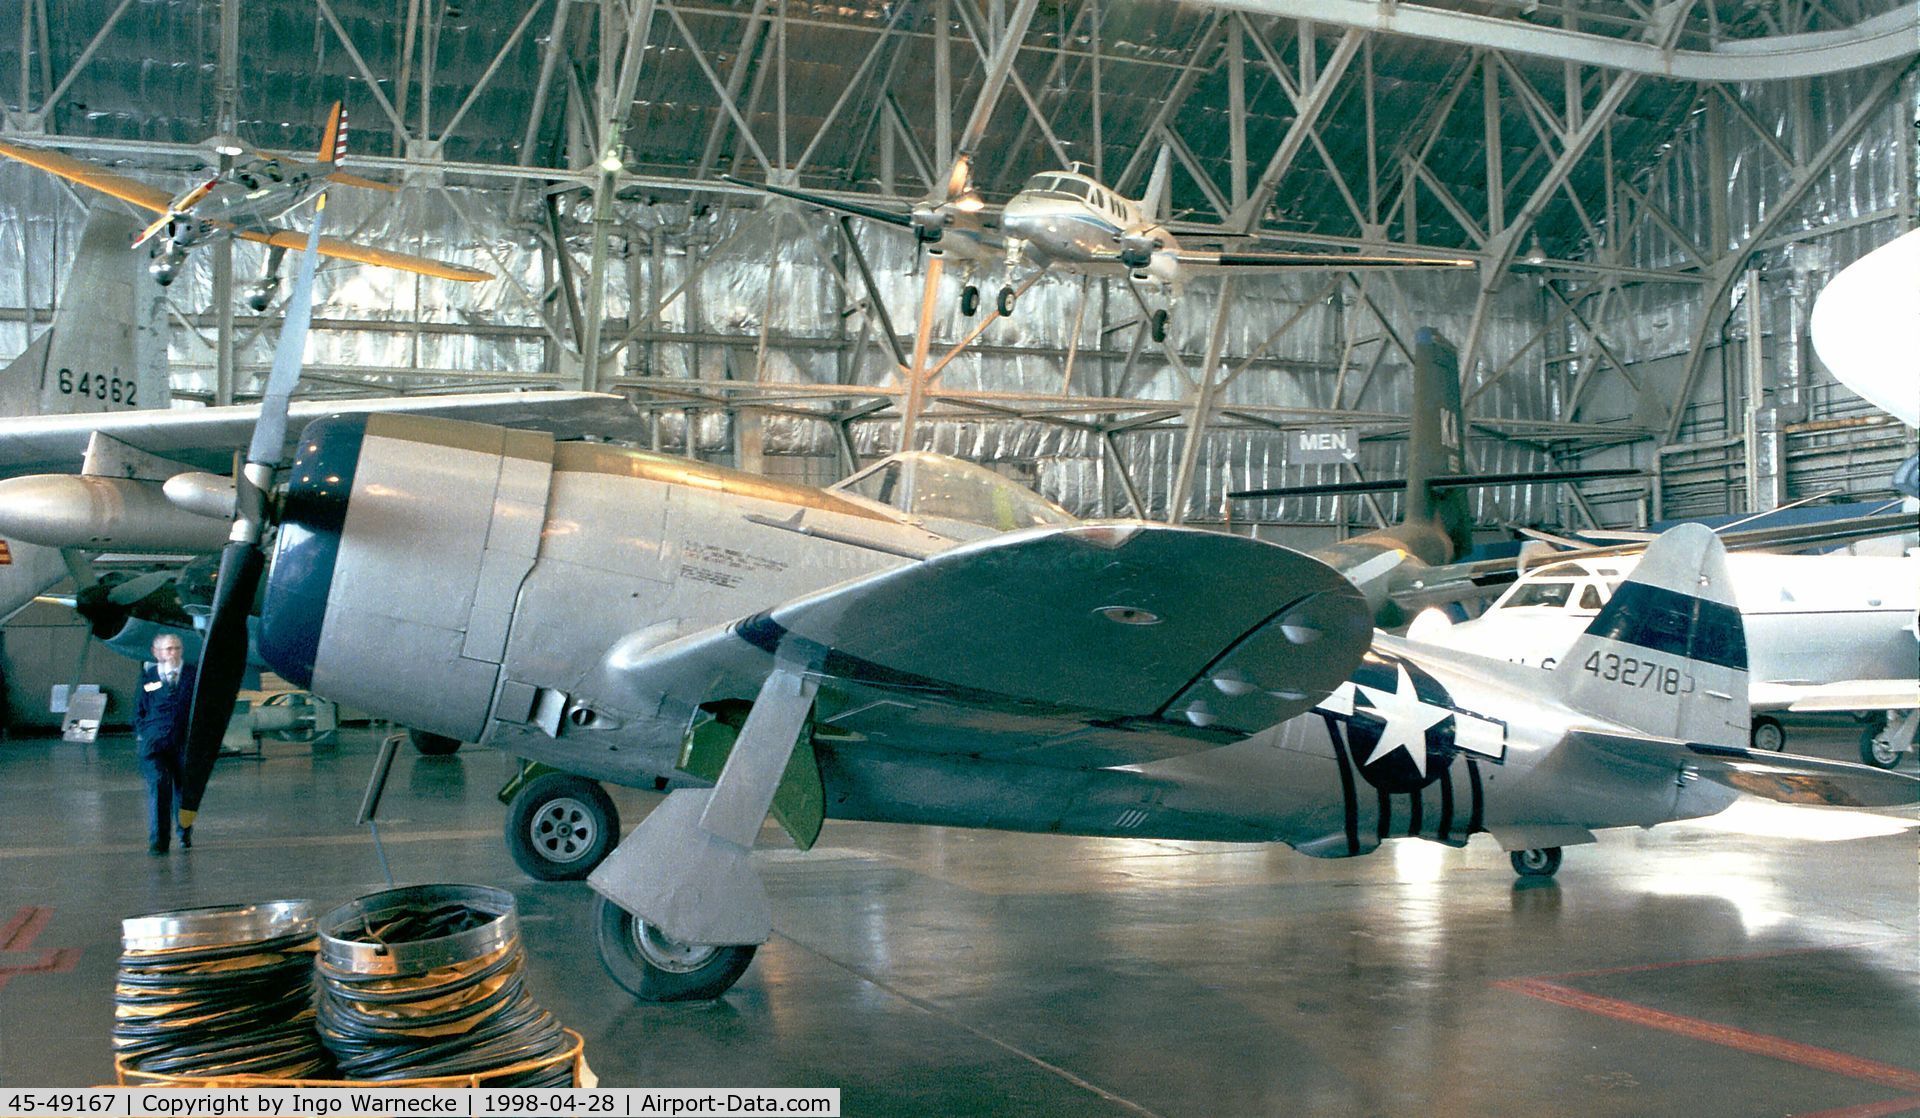 45-49167, 1942 Republic P-47D-15-RA Thunderbolt C/N 399-55706, Republic P-47D Thunderbolt of the USAAF at the USAF Museum, Dayton OH